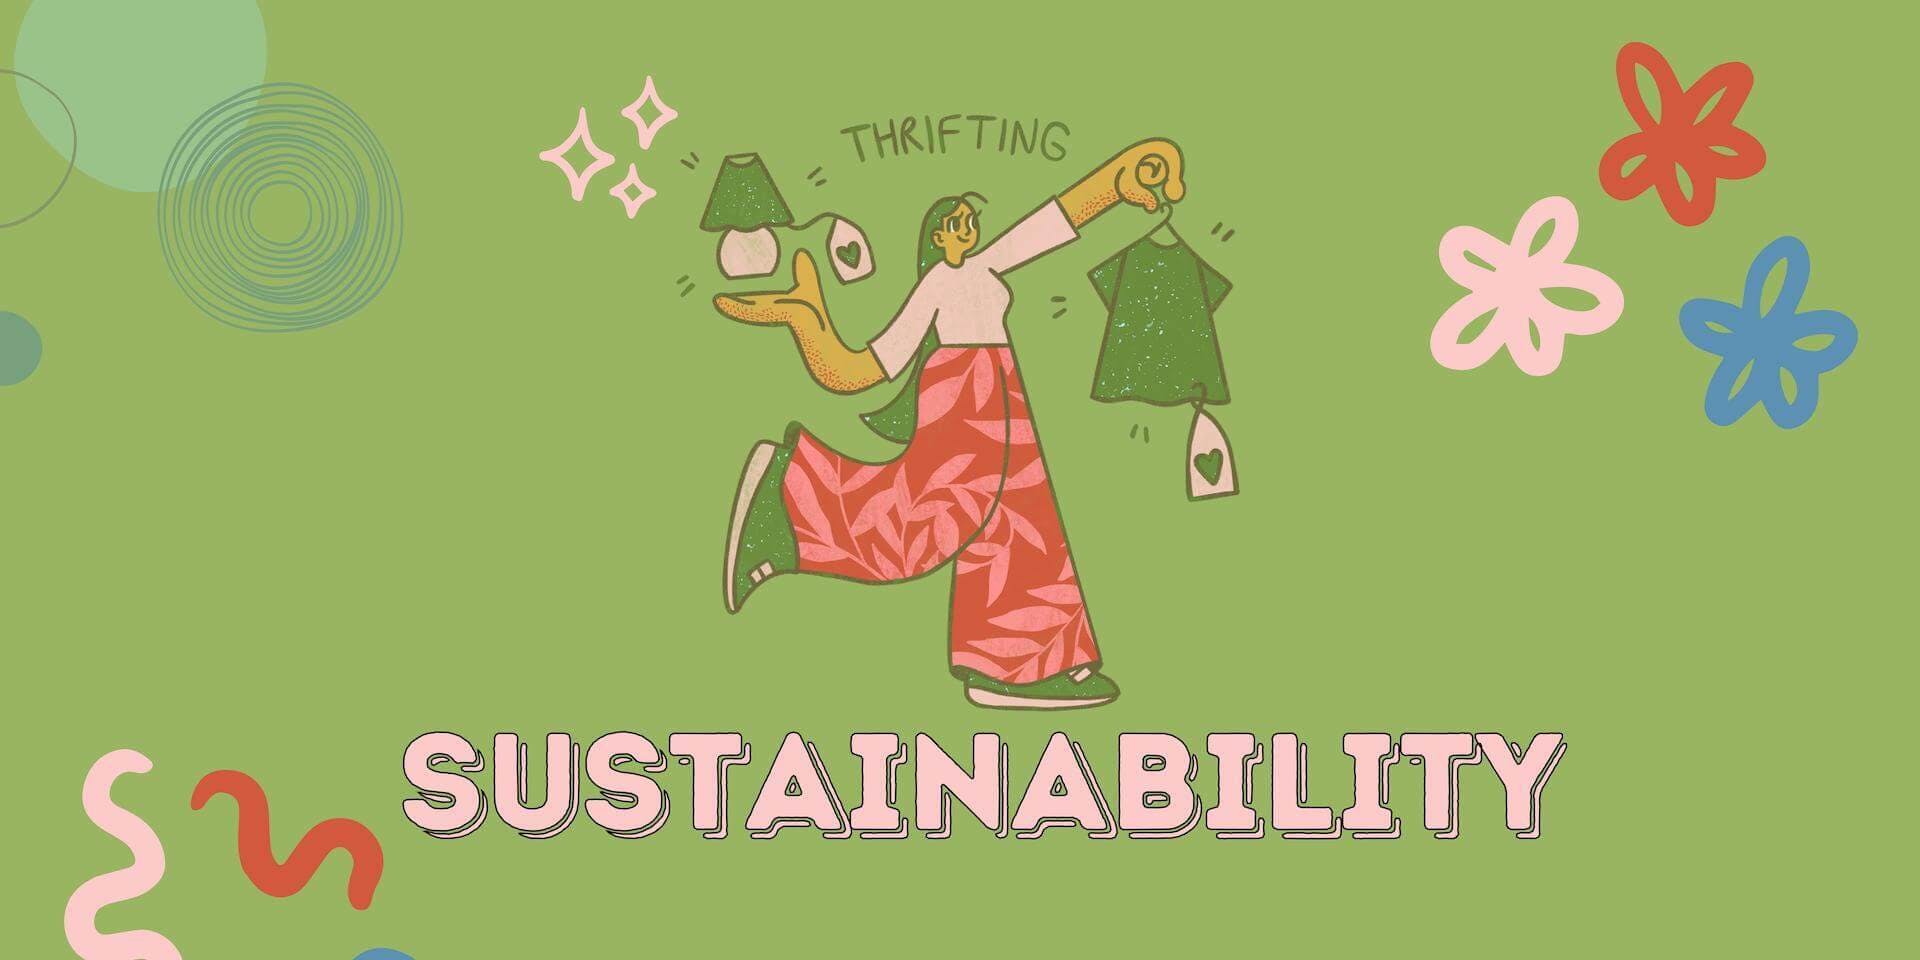 greater emphasis on sustainability